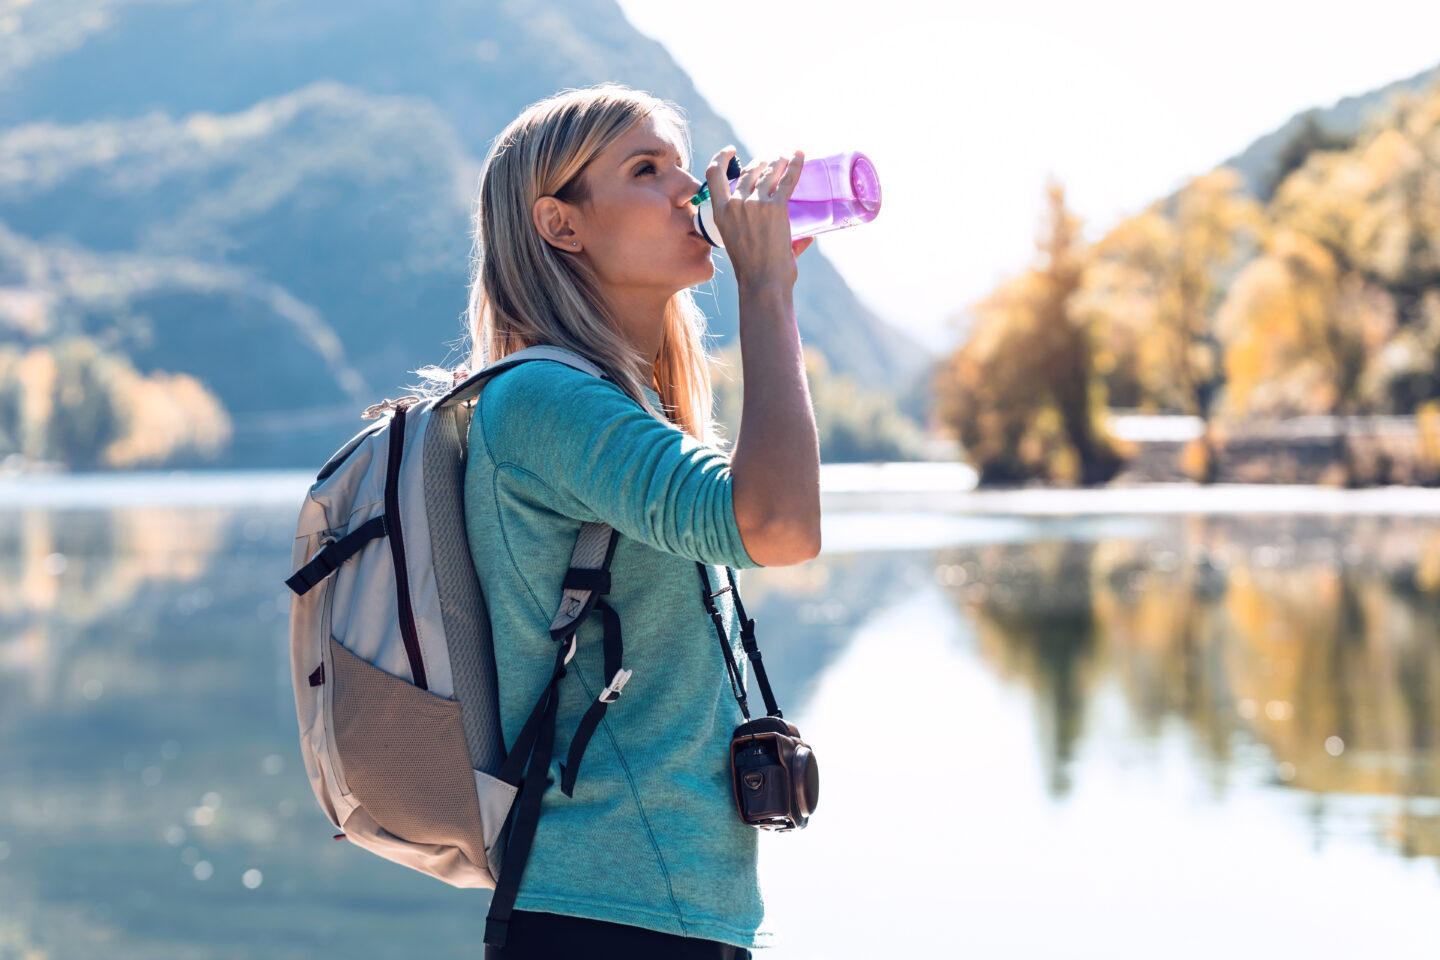 Hiking Solo For Beginners - Tips For Hiking Alone: stay hydrated